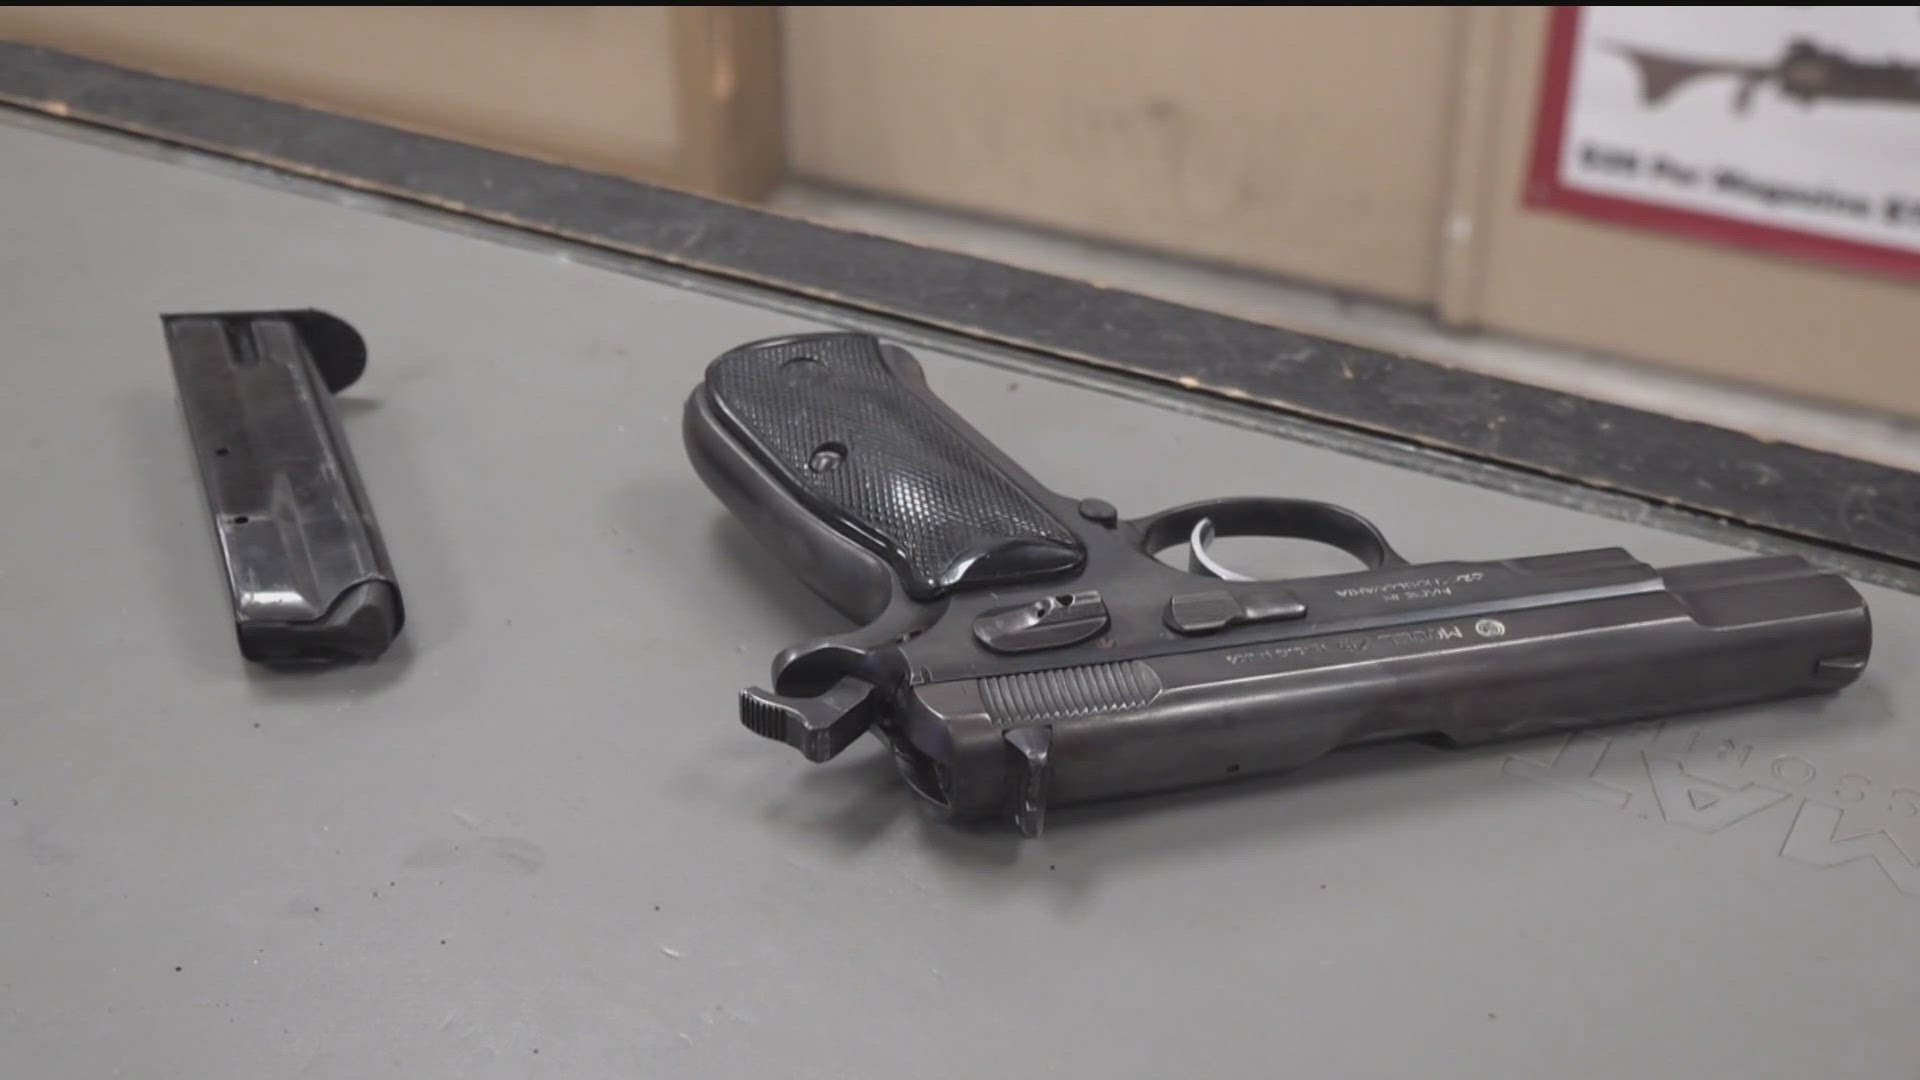 Savannah passed the local ordinance last month after police reported that 200 guns were stolen from unlocked vehicles last year.